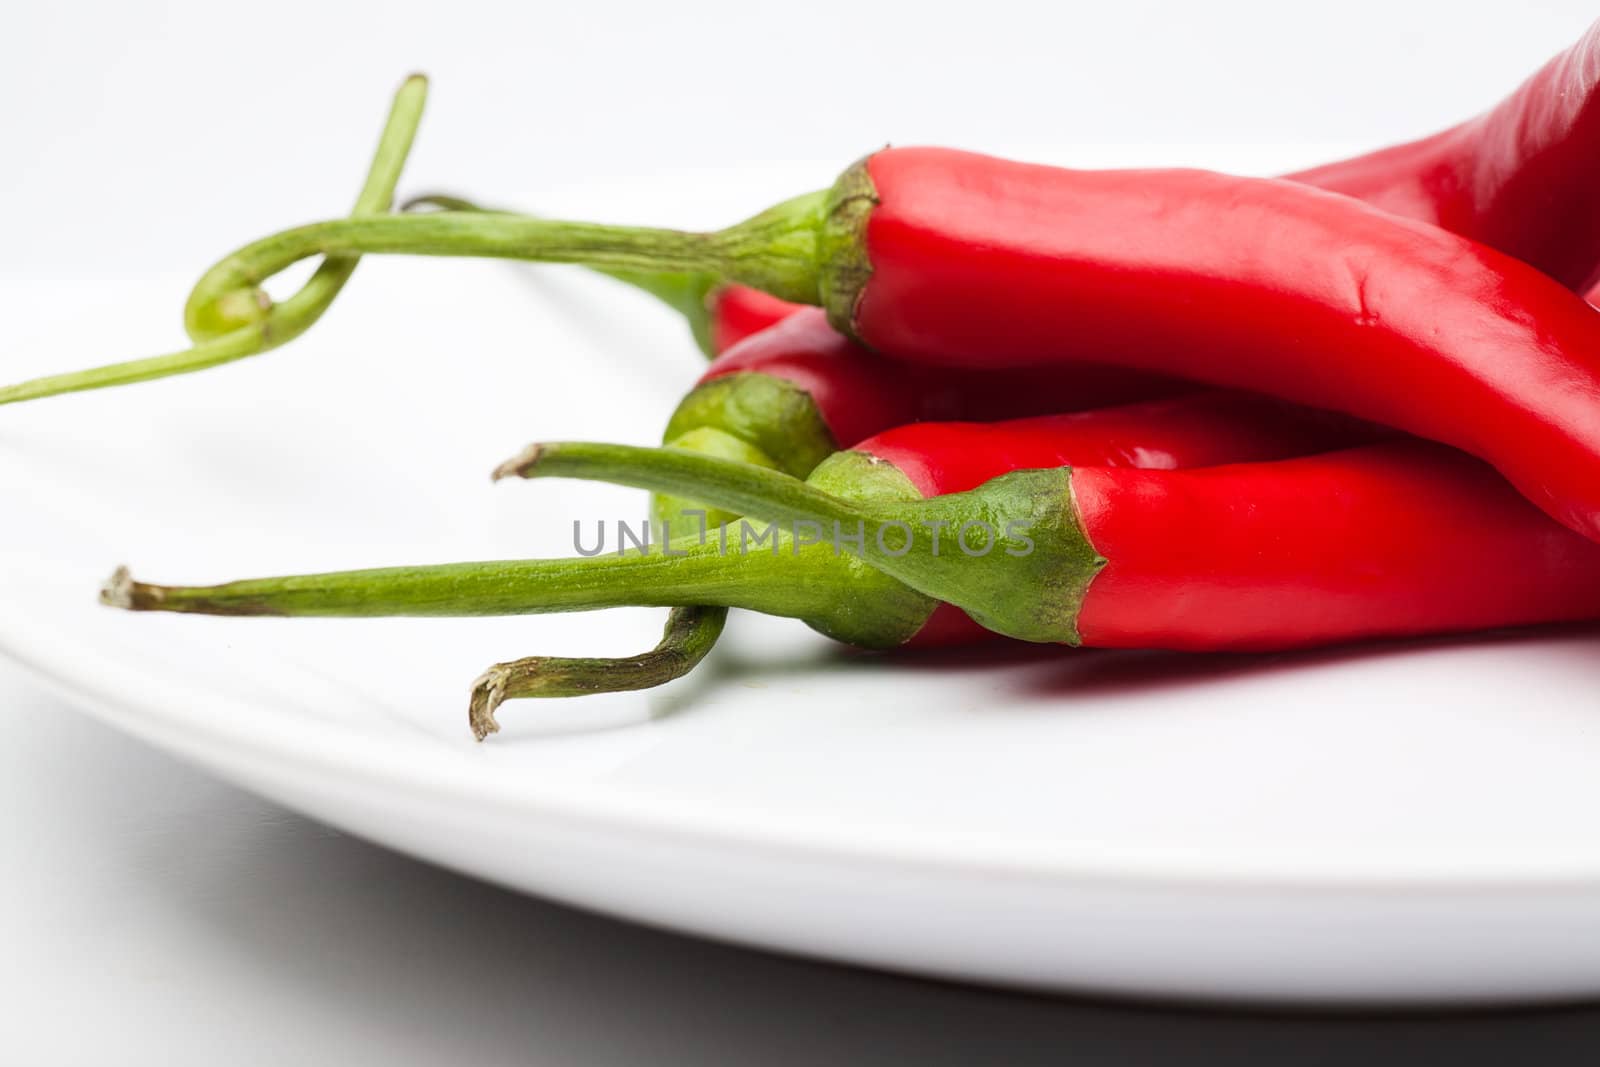 Closeup view of red chili peppers on a white plate